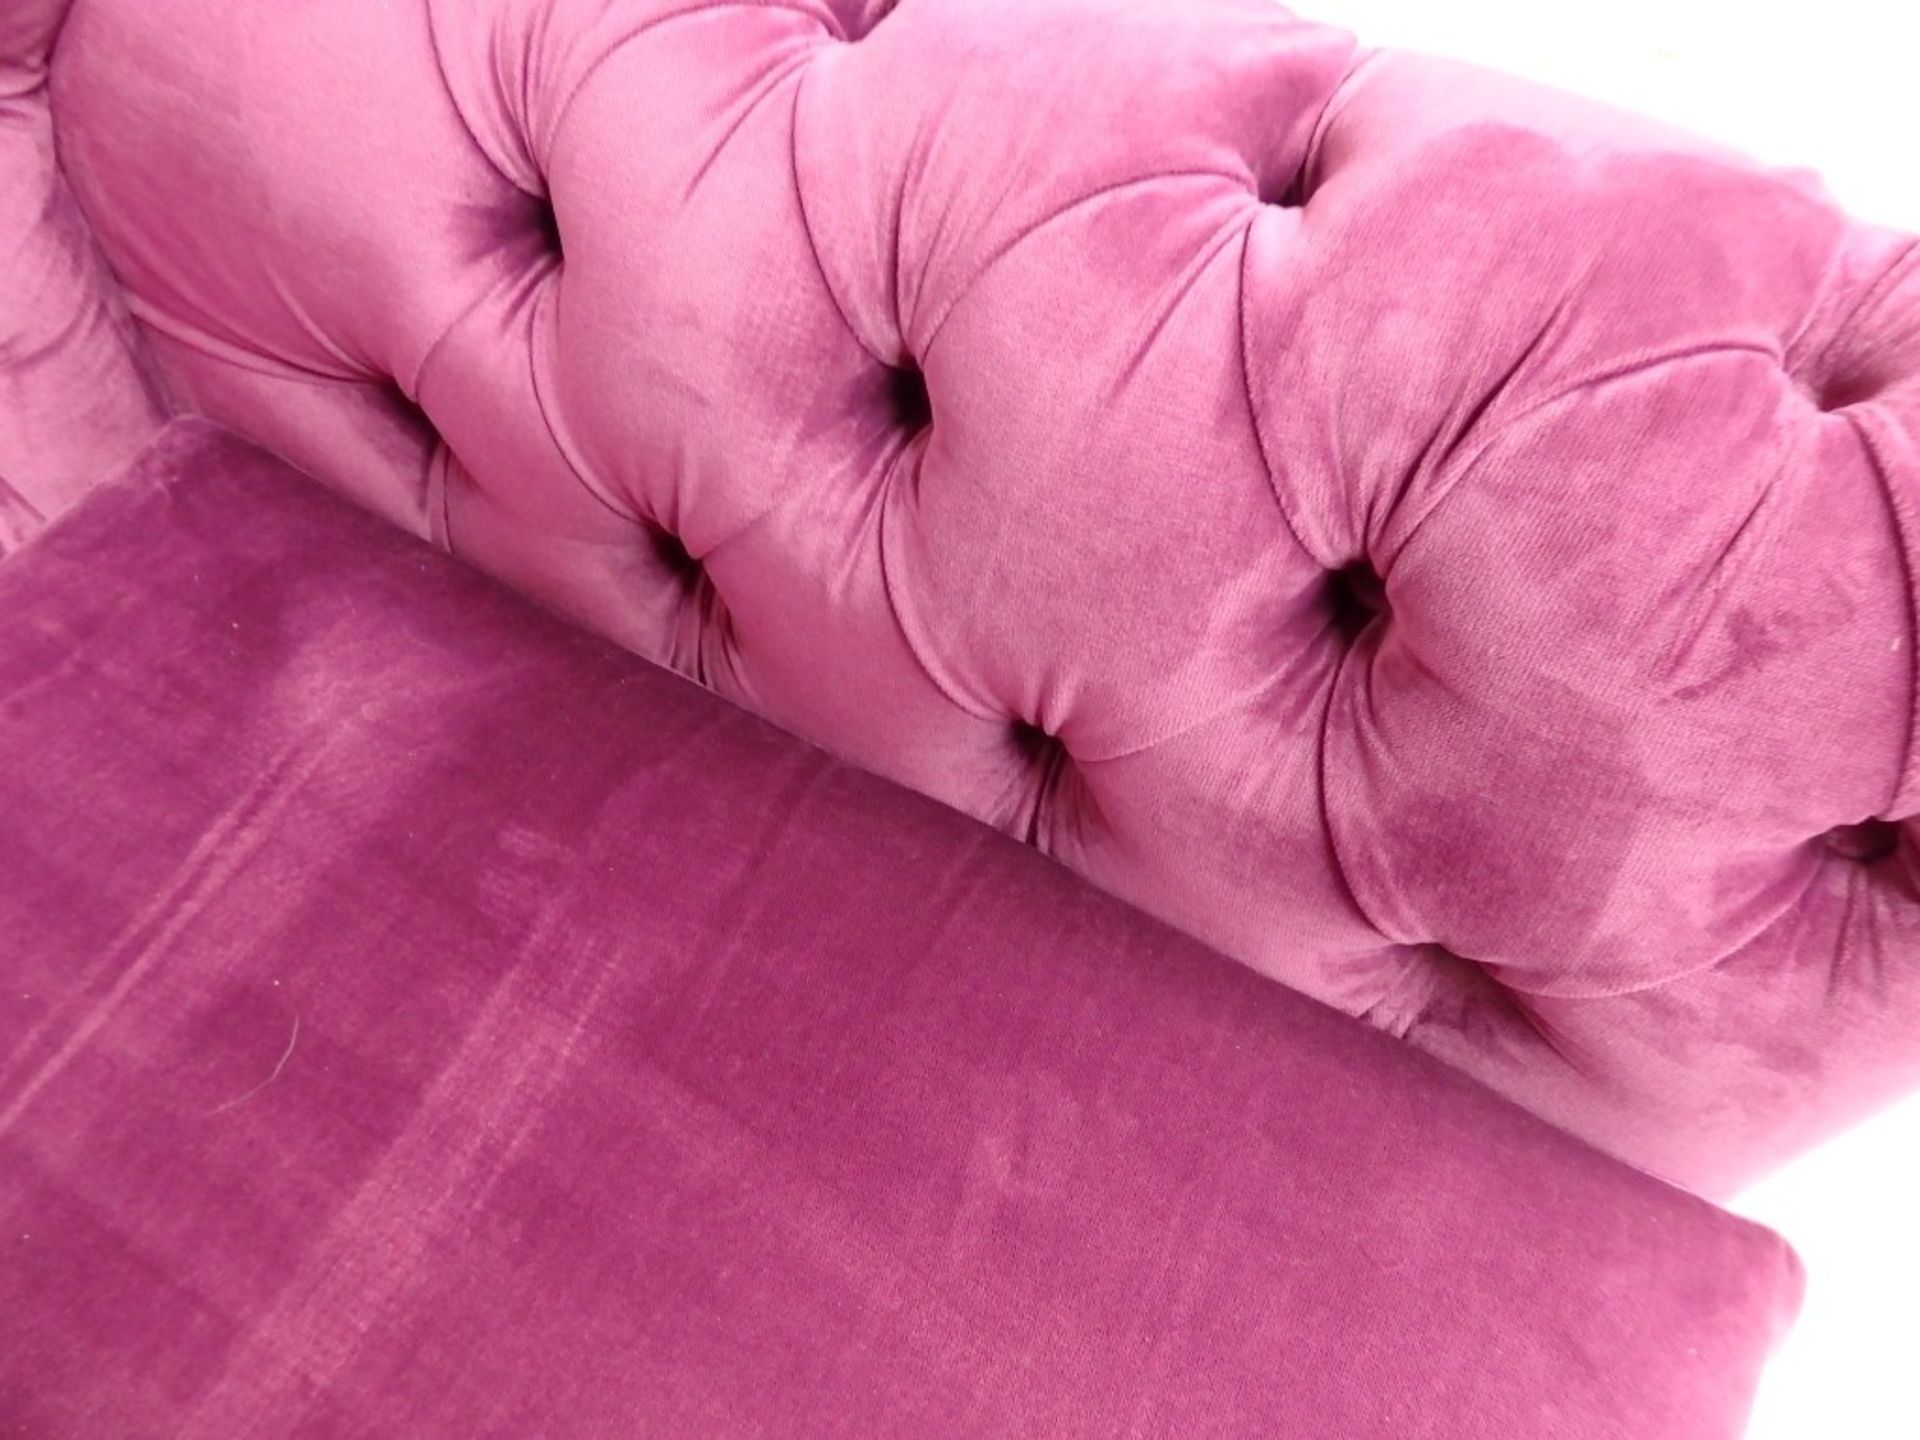 1 x Bespoke Oversized Chair (Cuddle Chair) - Upholstered In A Ritch Magenta Chenille - Expertly - Image 6 of 10